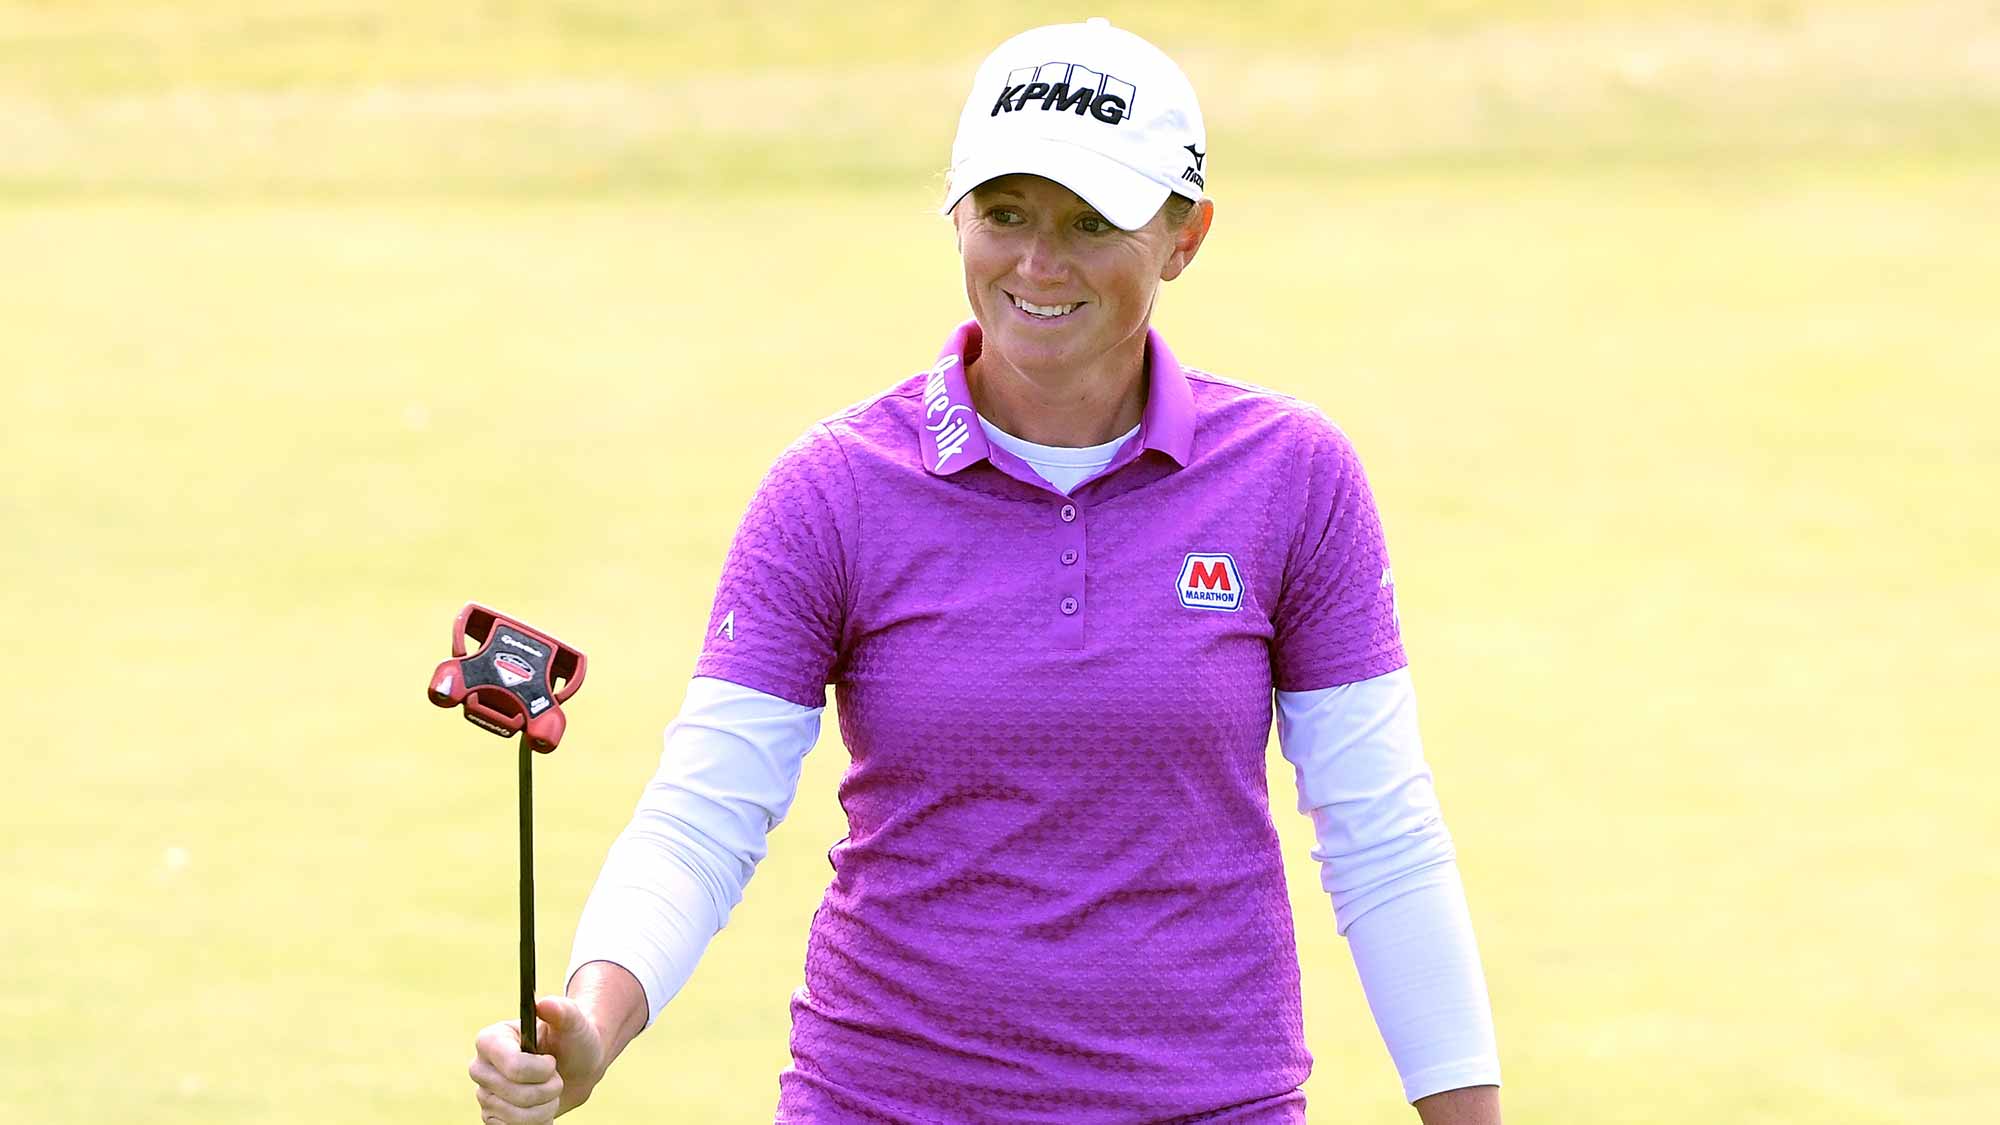 Stacy Lewis reacts to her birdie on the 10th green during round one of the Hugel-JTBC LA Open at the Wilshire Country Club on April 19, 2018 in Los Angeles, California